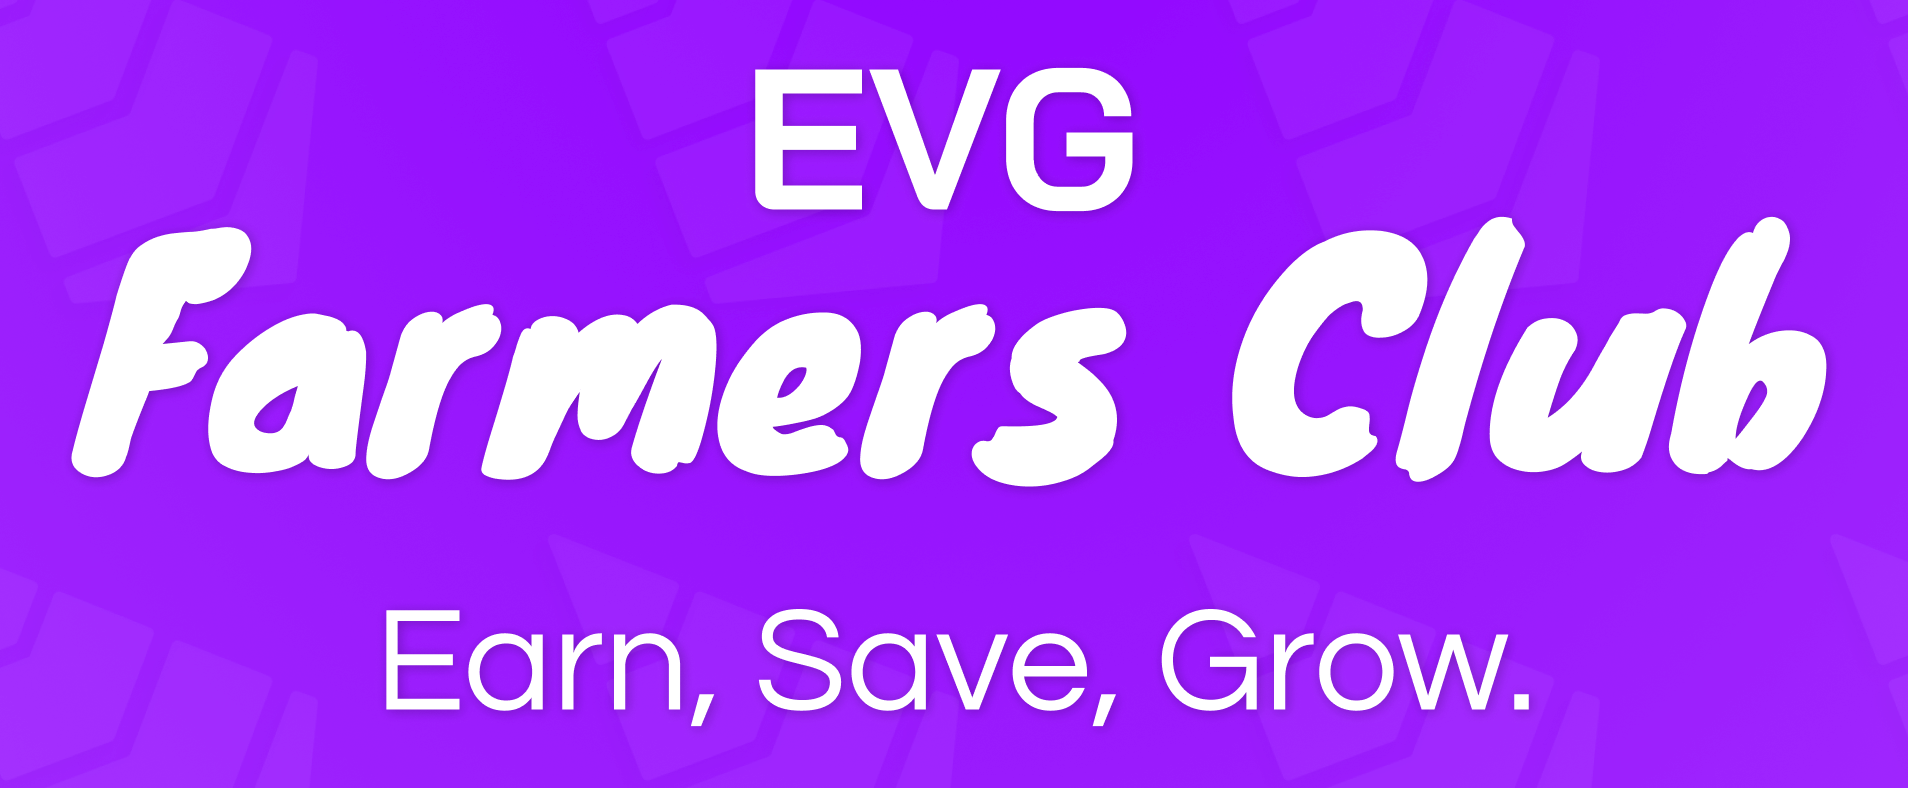 Introducing the EVG Farmers Club: Where you can earn more!